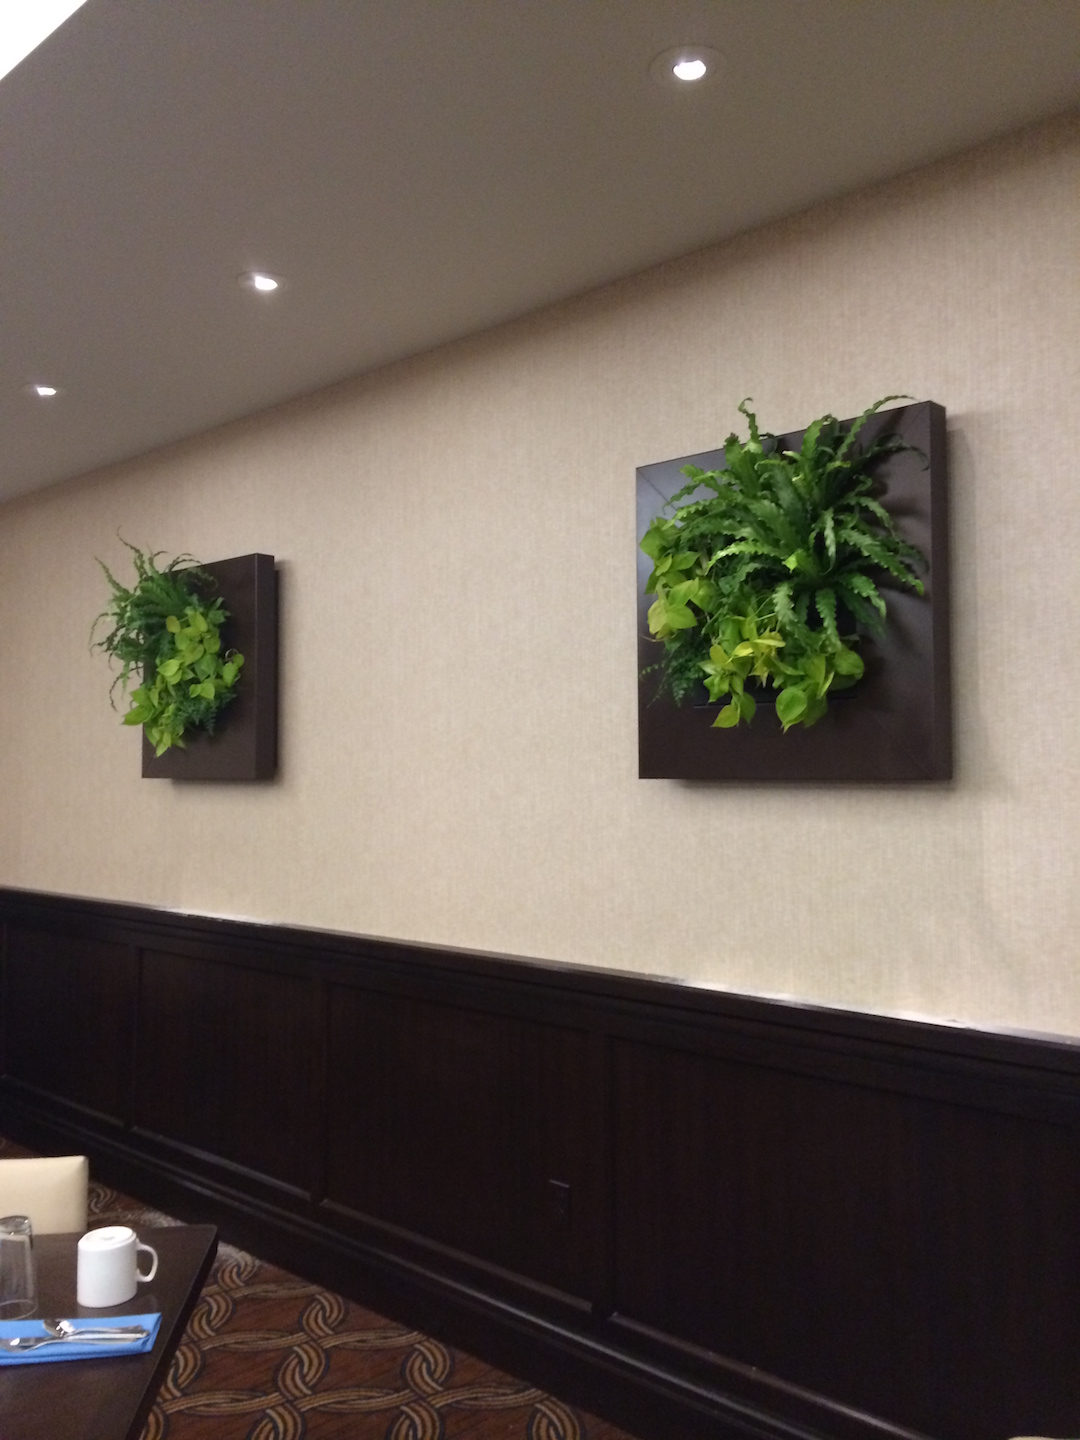 Living plant picture with live green plants installed on walls